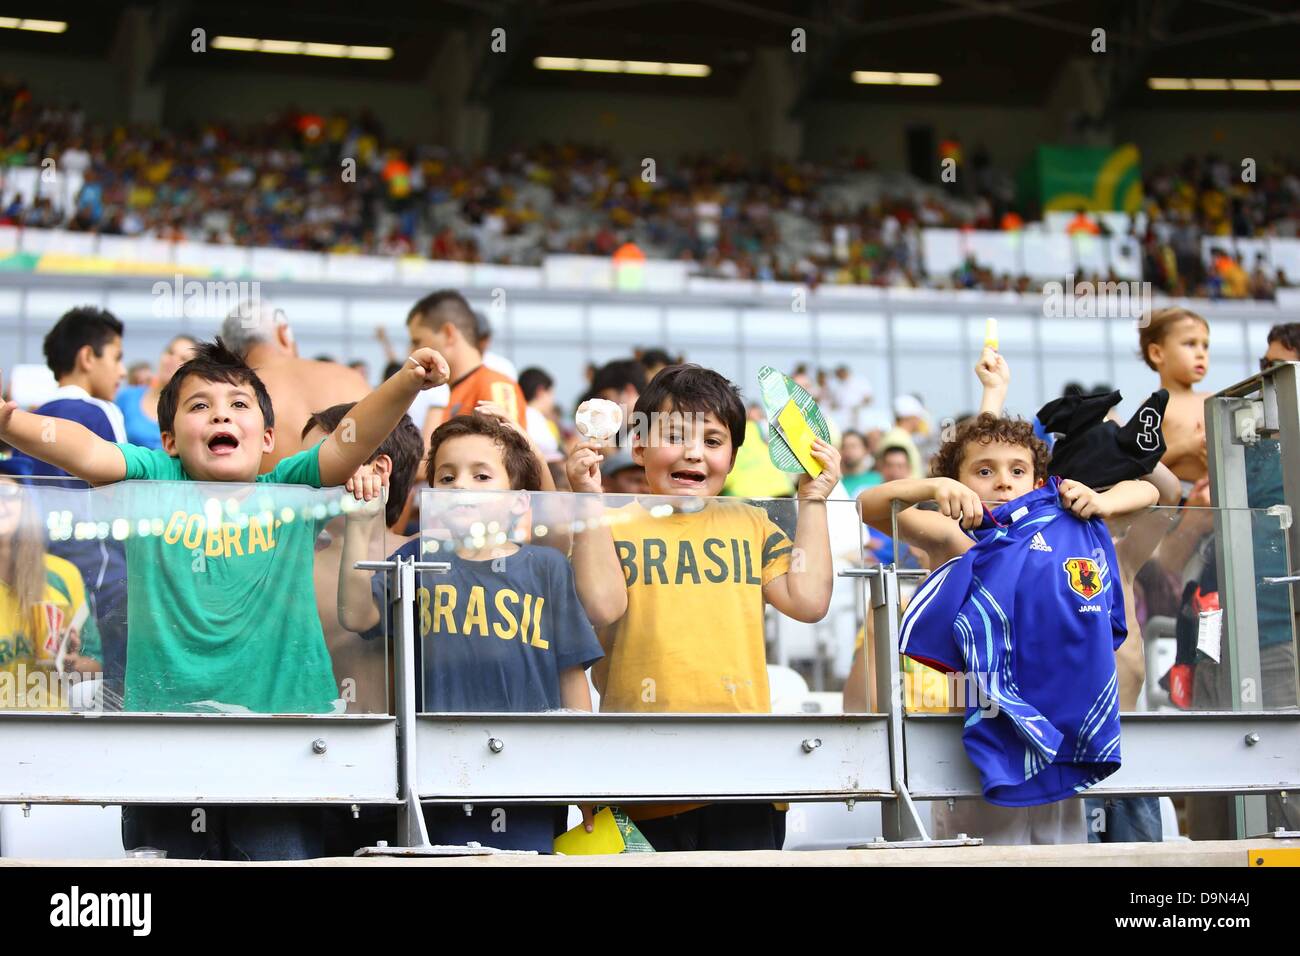 Kids fans, JUNE 22, 2013 - Football / Soccer : FIFA Confederations Cup Brazil 2013, Group A match between Mexico 2-1 Japan at Mineirao Stadium in Belo Horizonte, Brazil. (Photo by Toshihiro Kitagawa/AFLO) Stock Photo